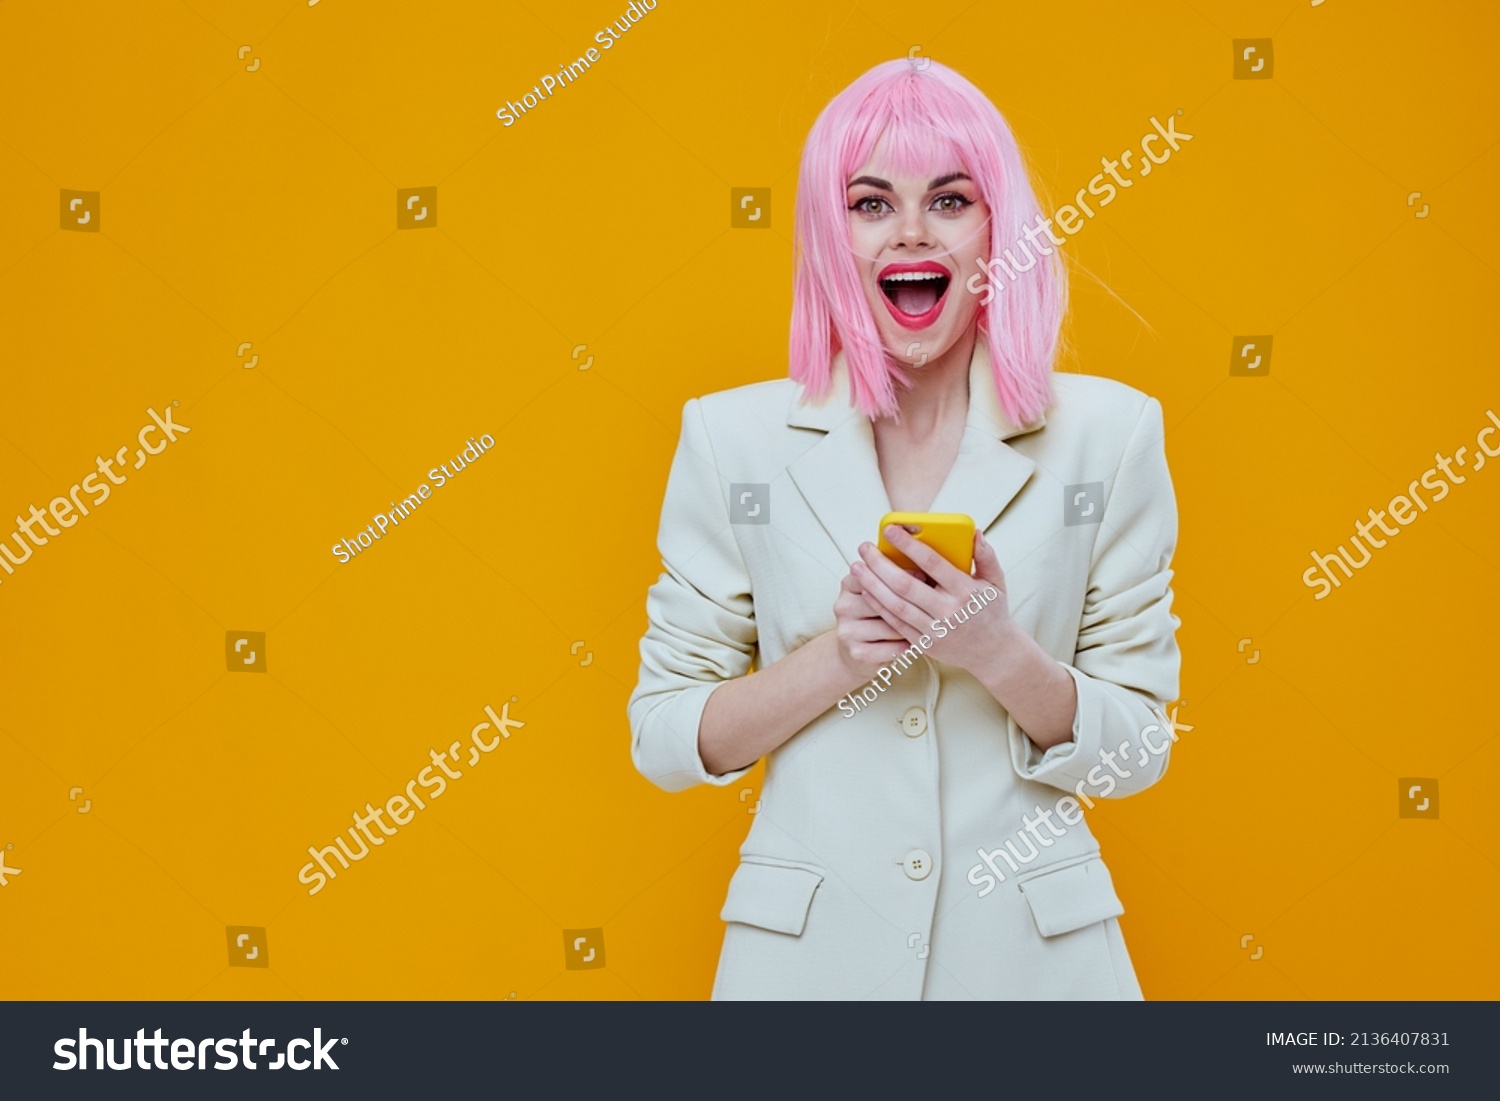 glamorous woman with pink hair cosmetics posing yellow phone in hands #2136407831